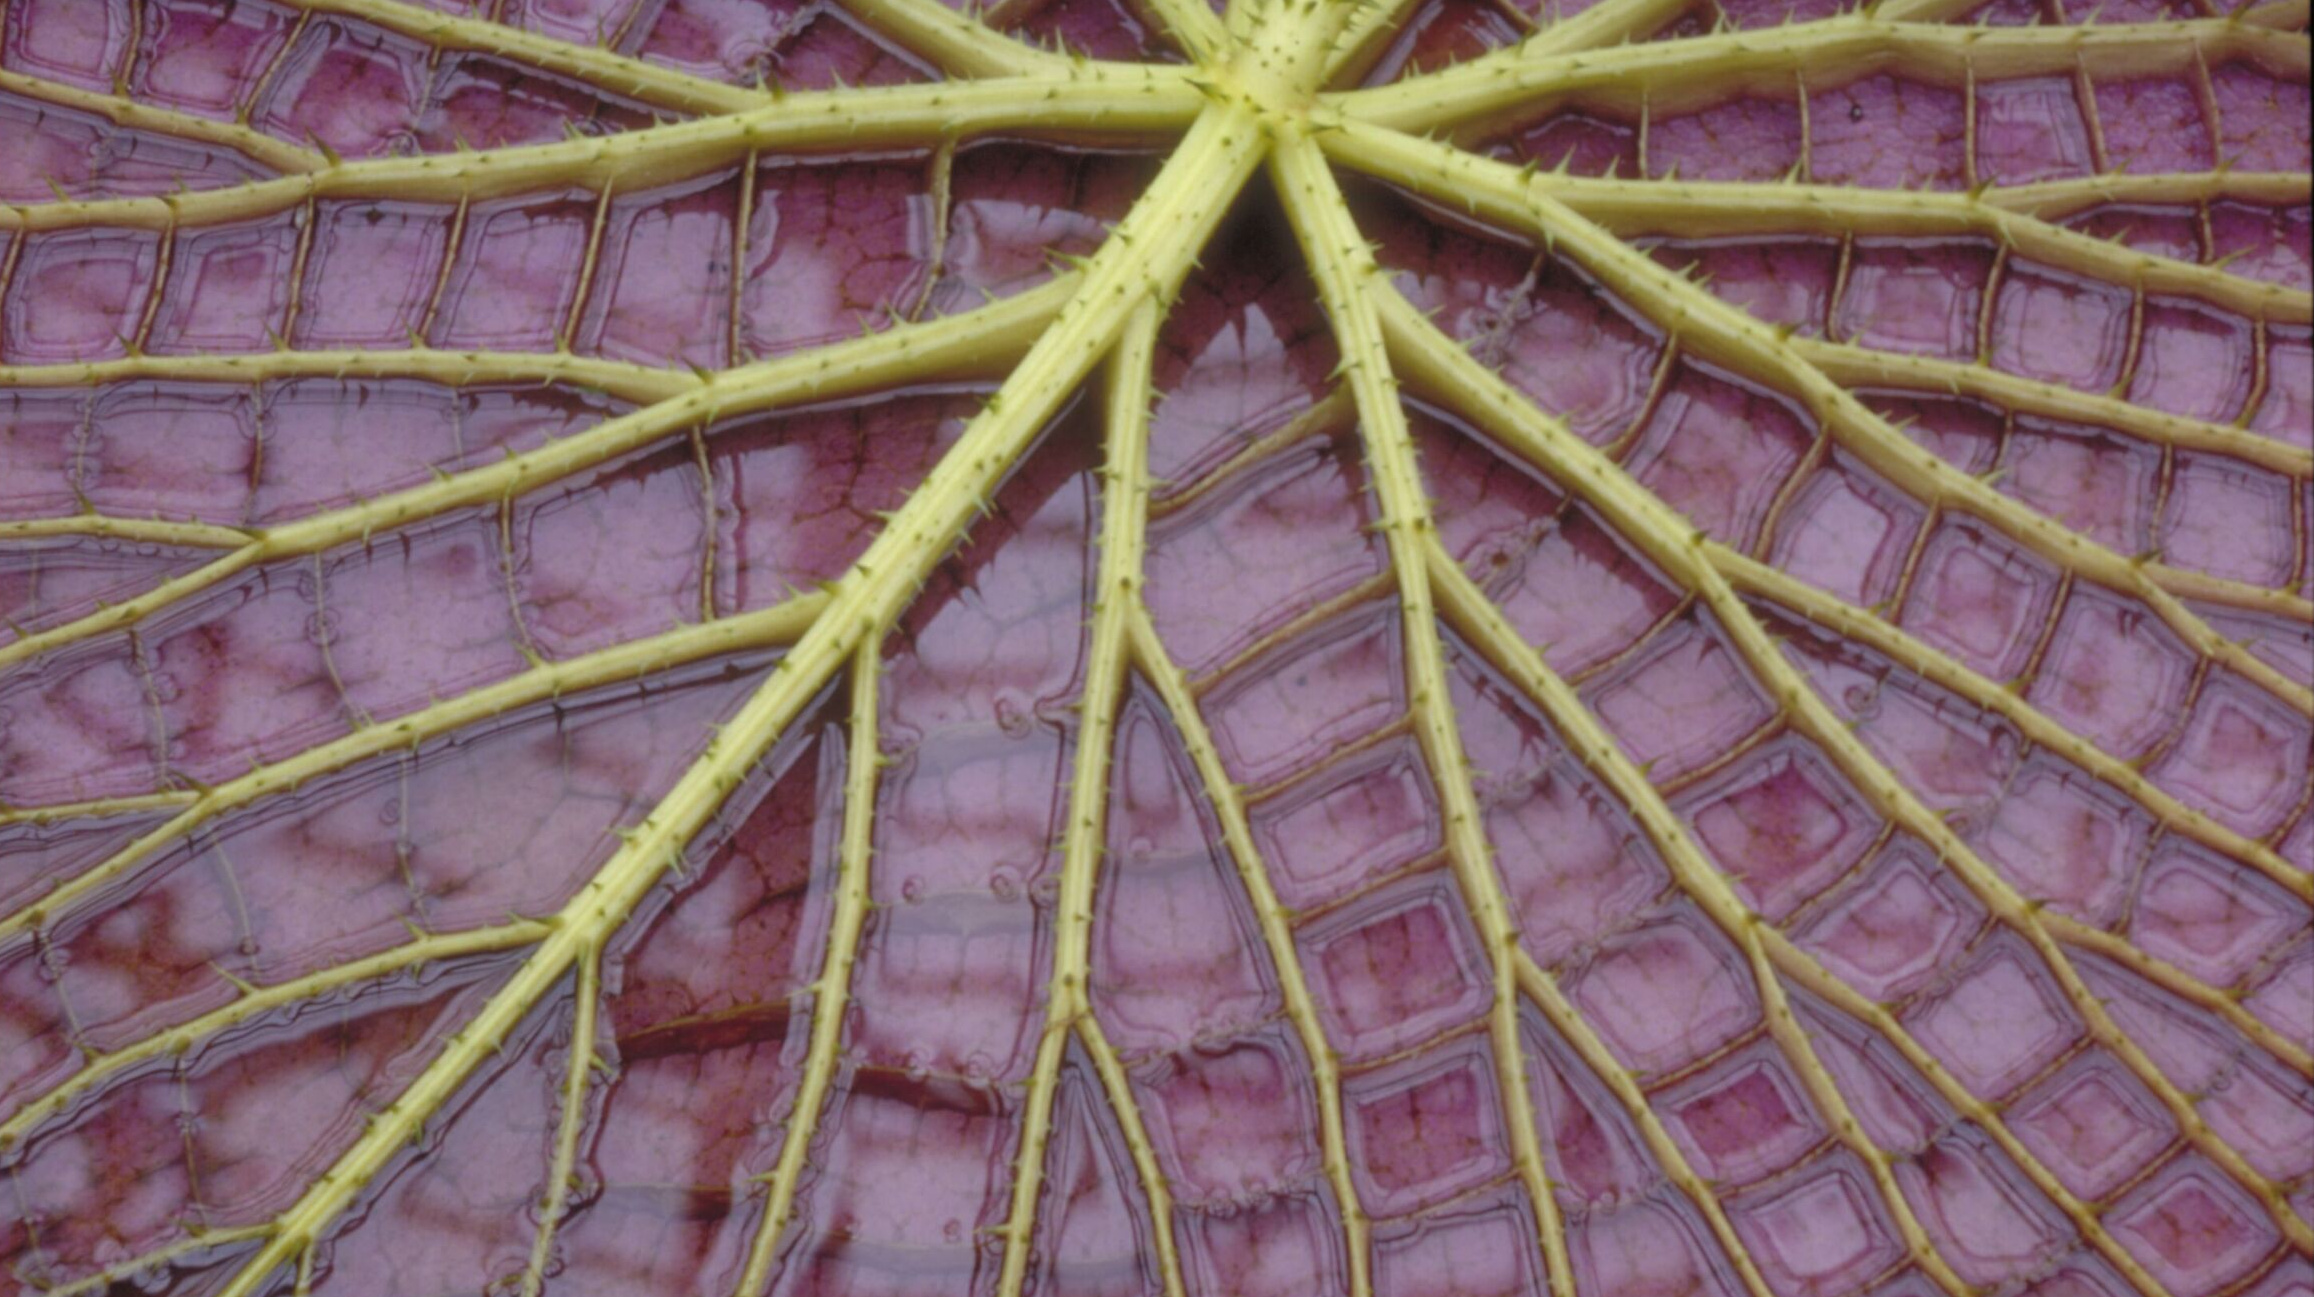 Underside of a giant waterlily leaf, showing bright green veins on a purple surface